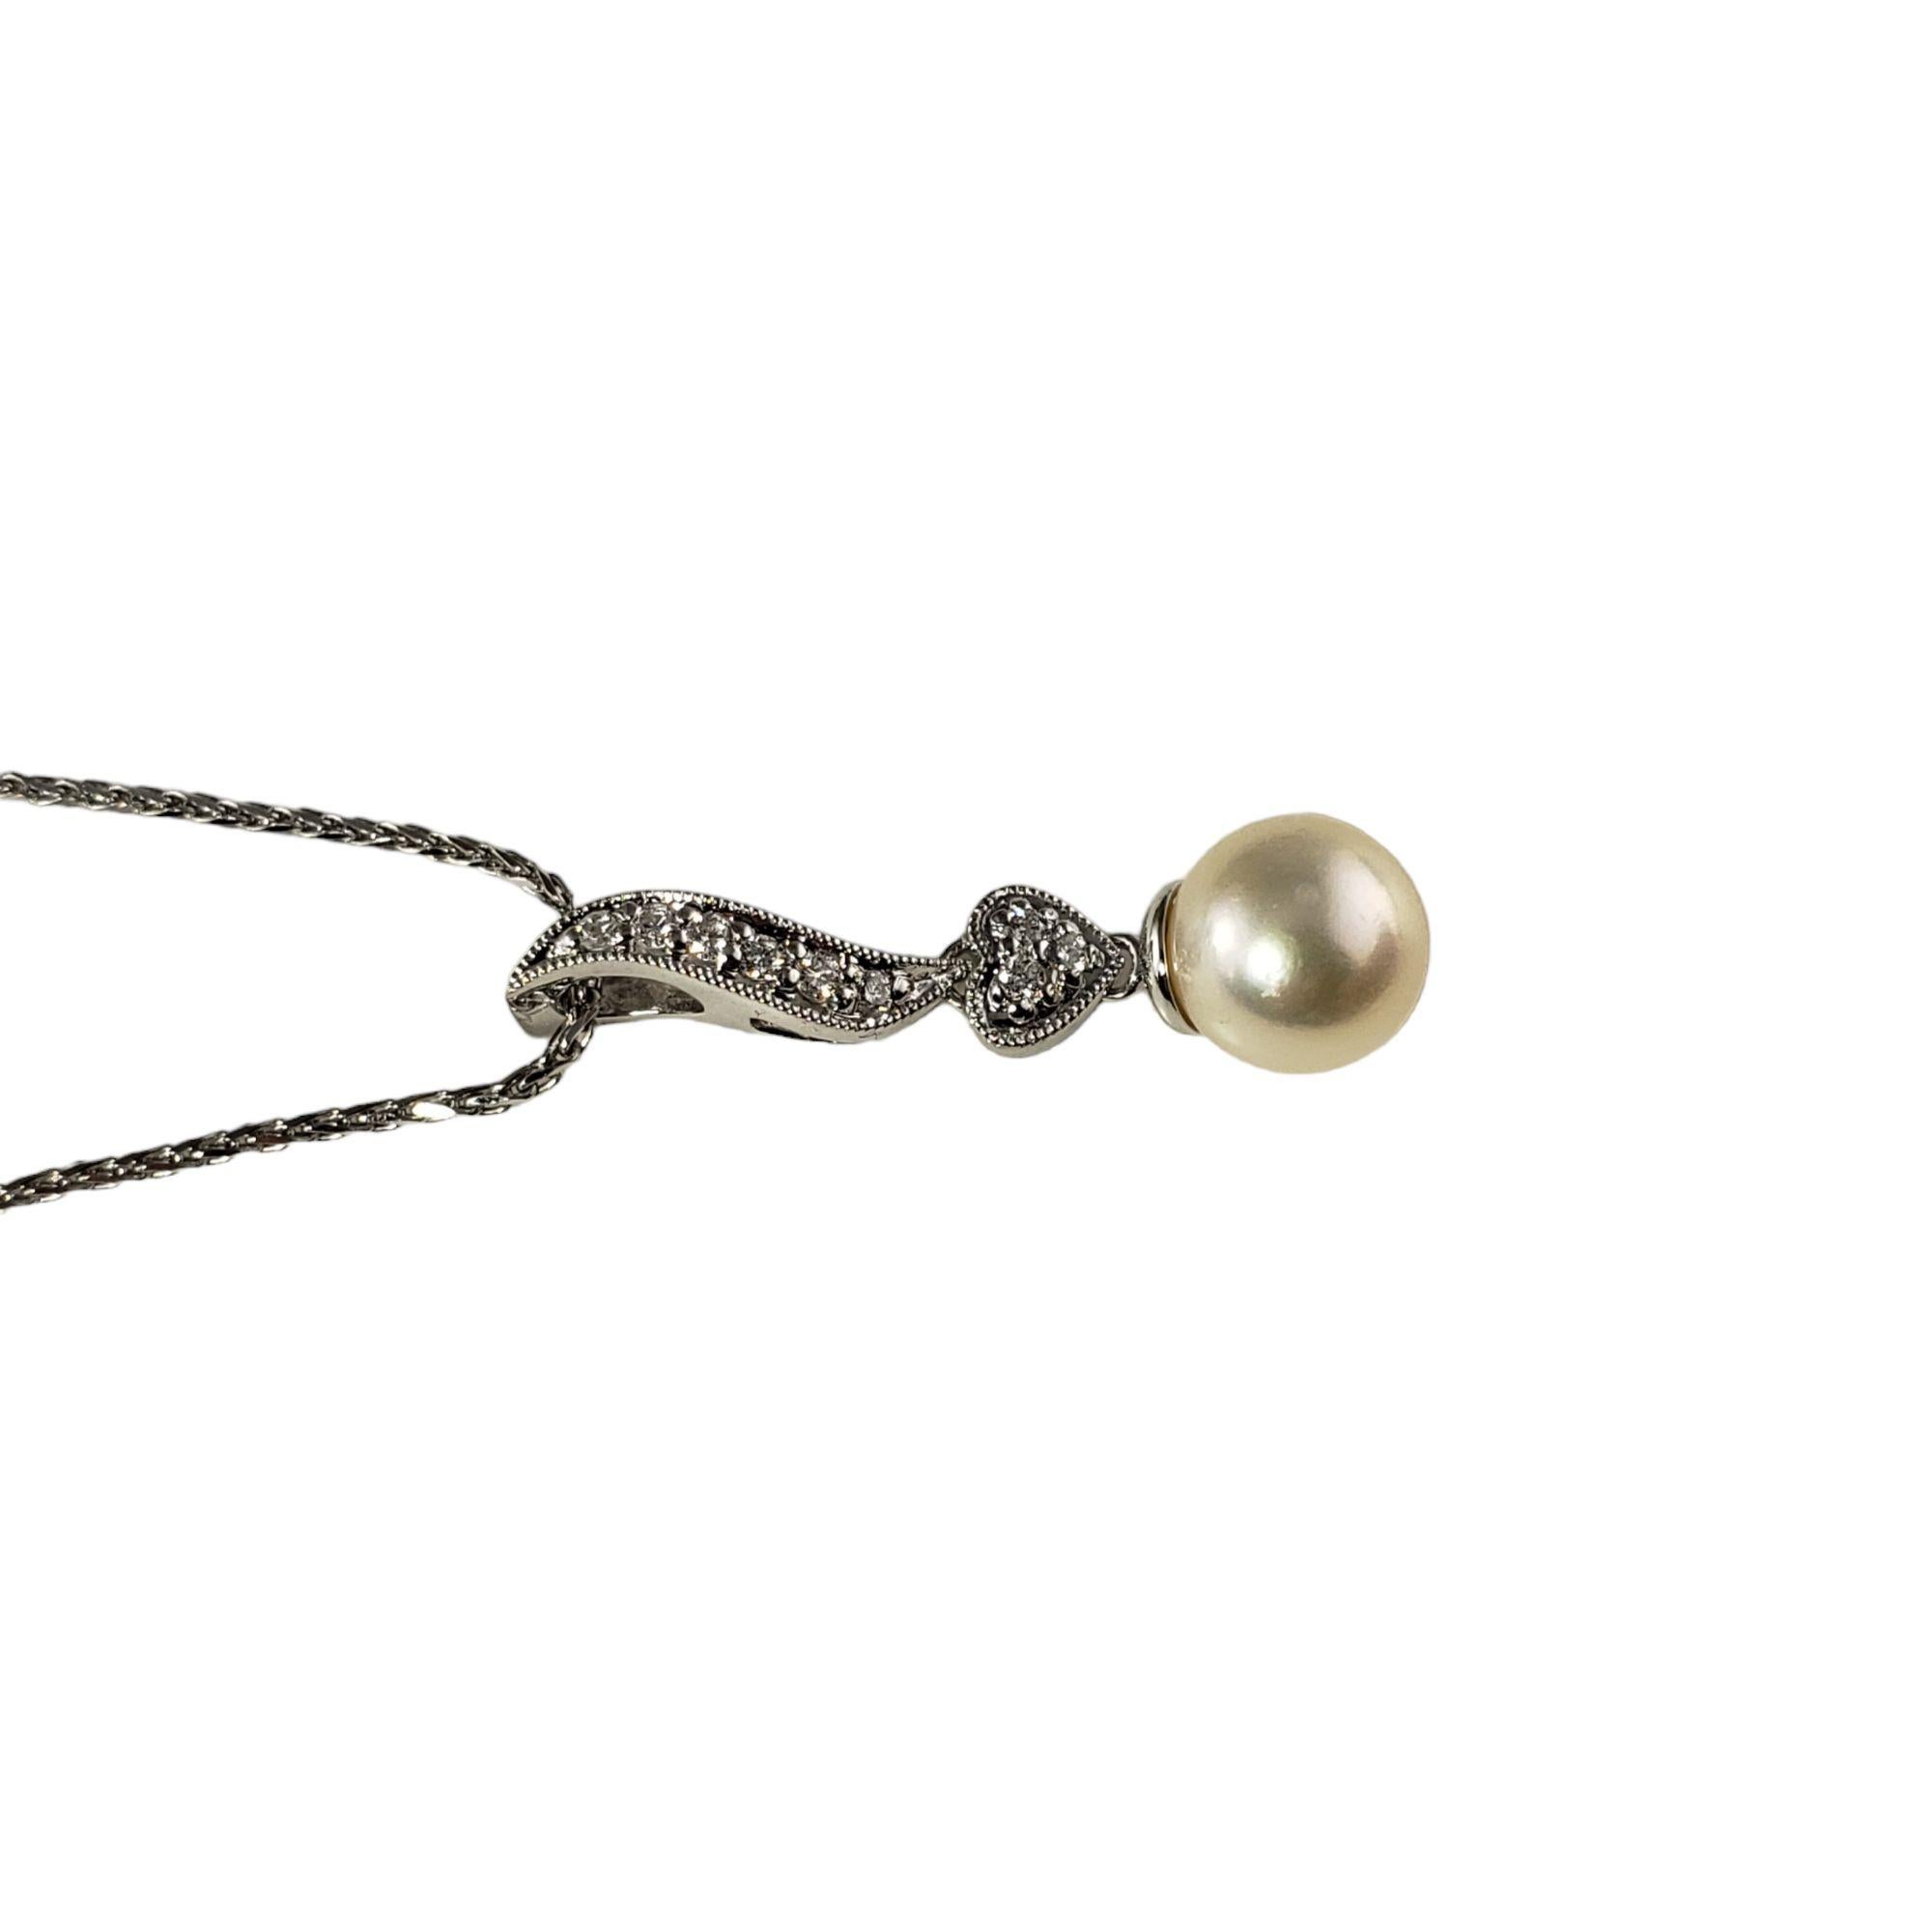 Vintage 14 Karat White Gold Pearl and Diamond Pendant Necklace-

This lovely pendant necklace features one 8 mm pearl and nine round brilliant cut diamonds set in 14K white gold.

*Matching earrings: RL-00013920

Approximate total diamond weight: